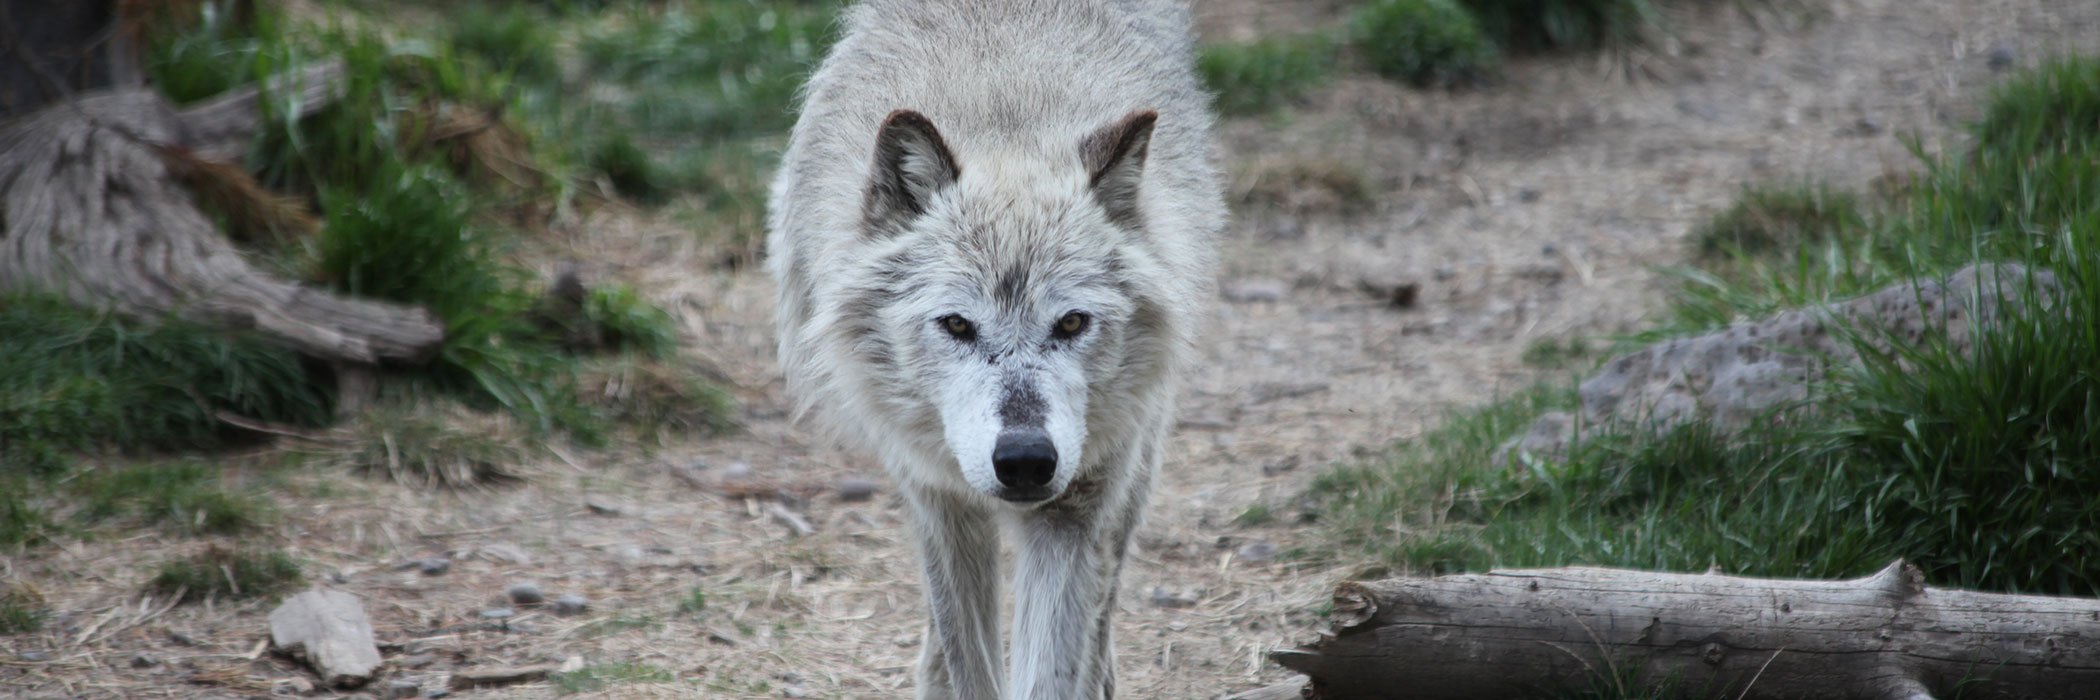 Grey wolf in Yellowstone National Park